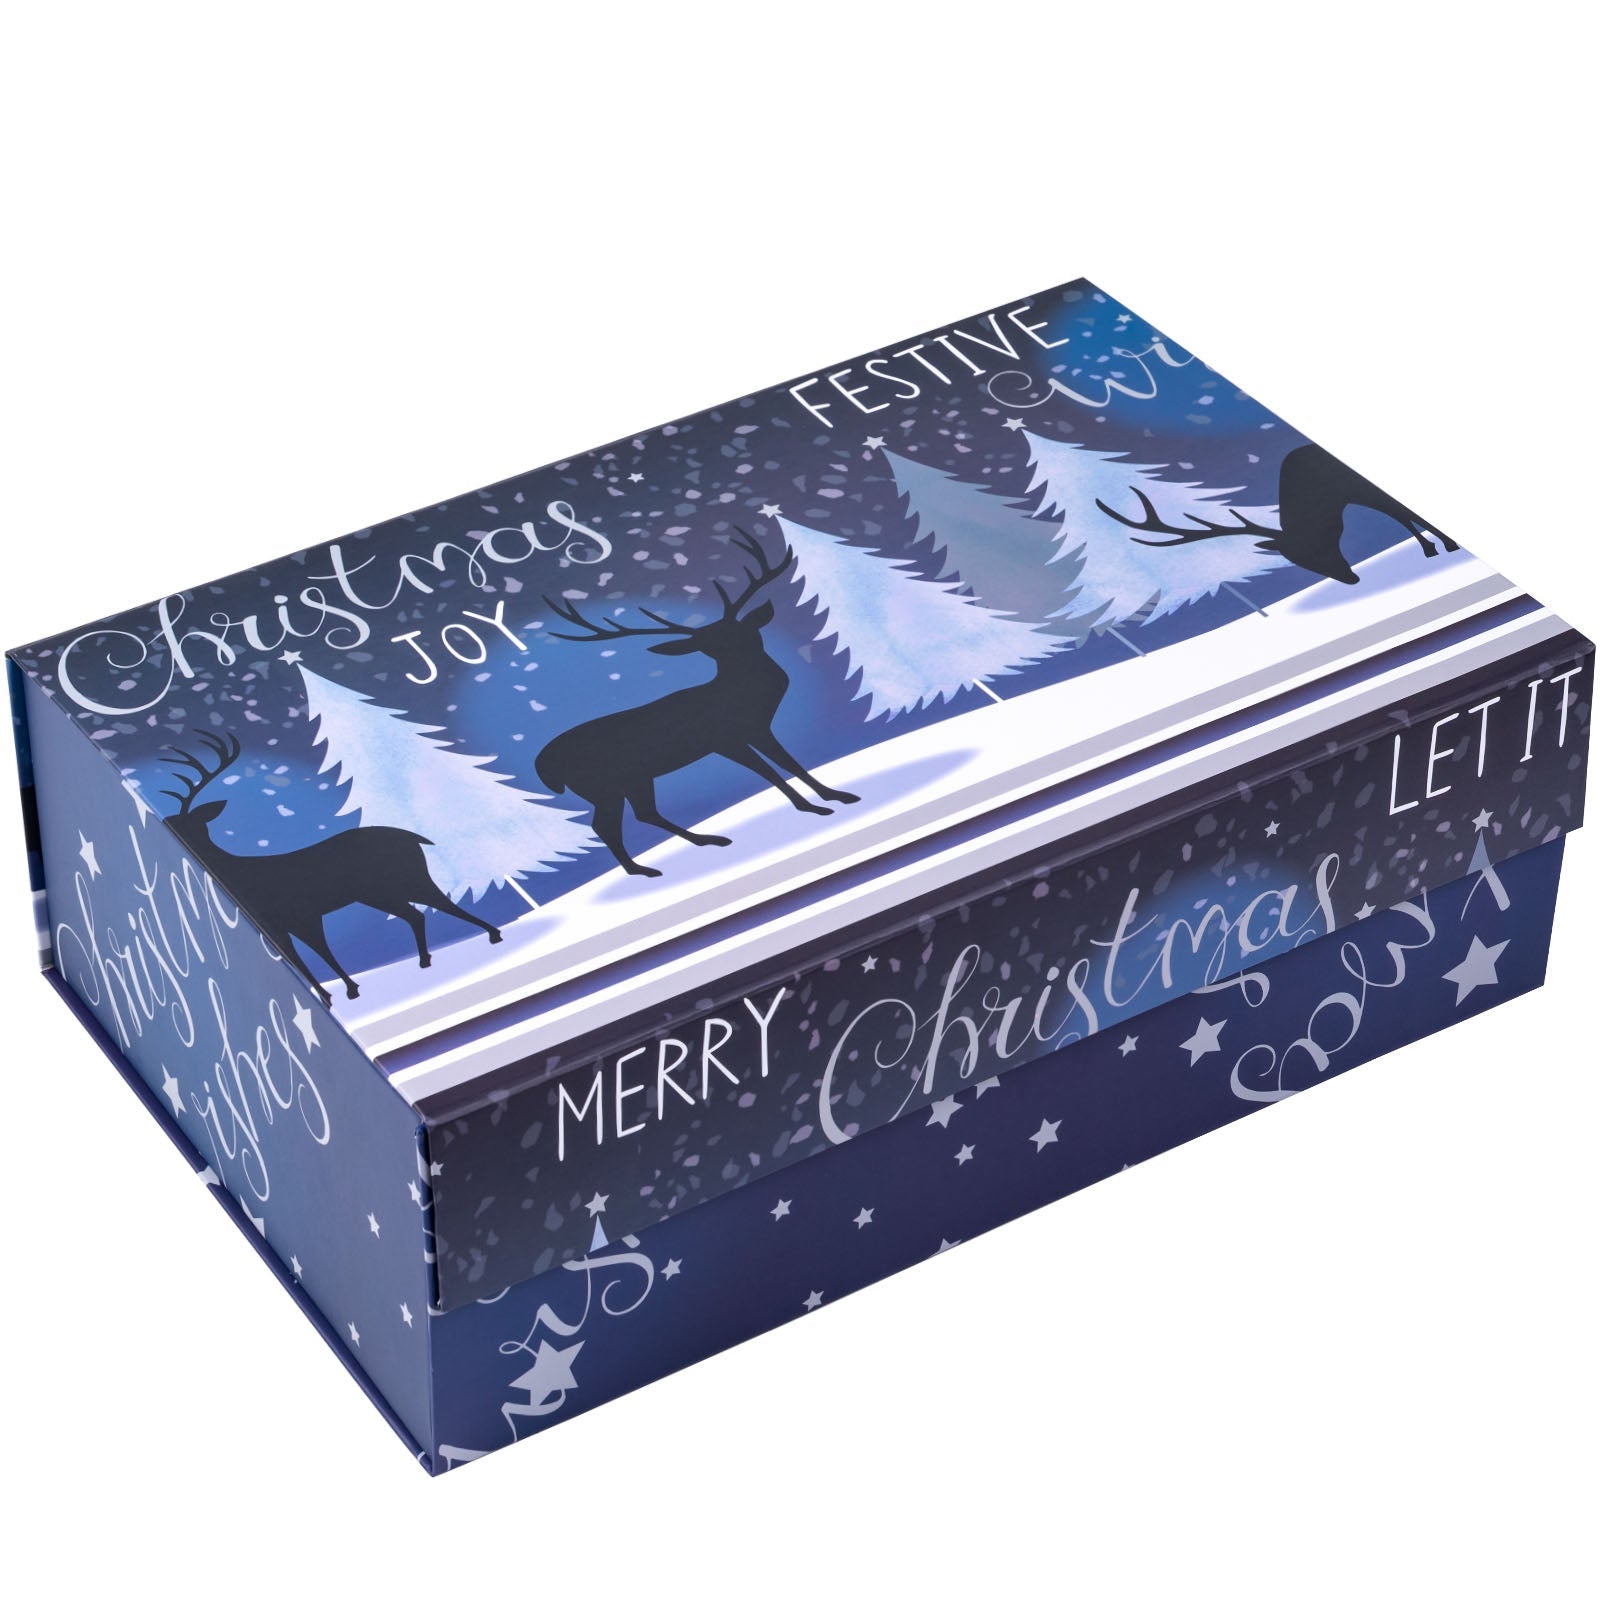 14x9x4.3 inch Collapsible Gift Box with Magnetic Closure - Night Reindeer